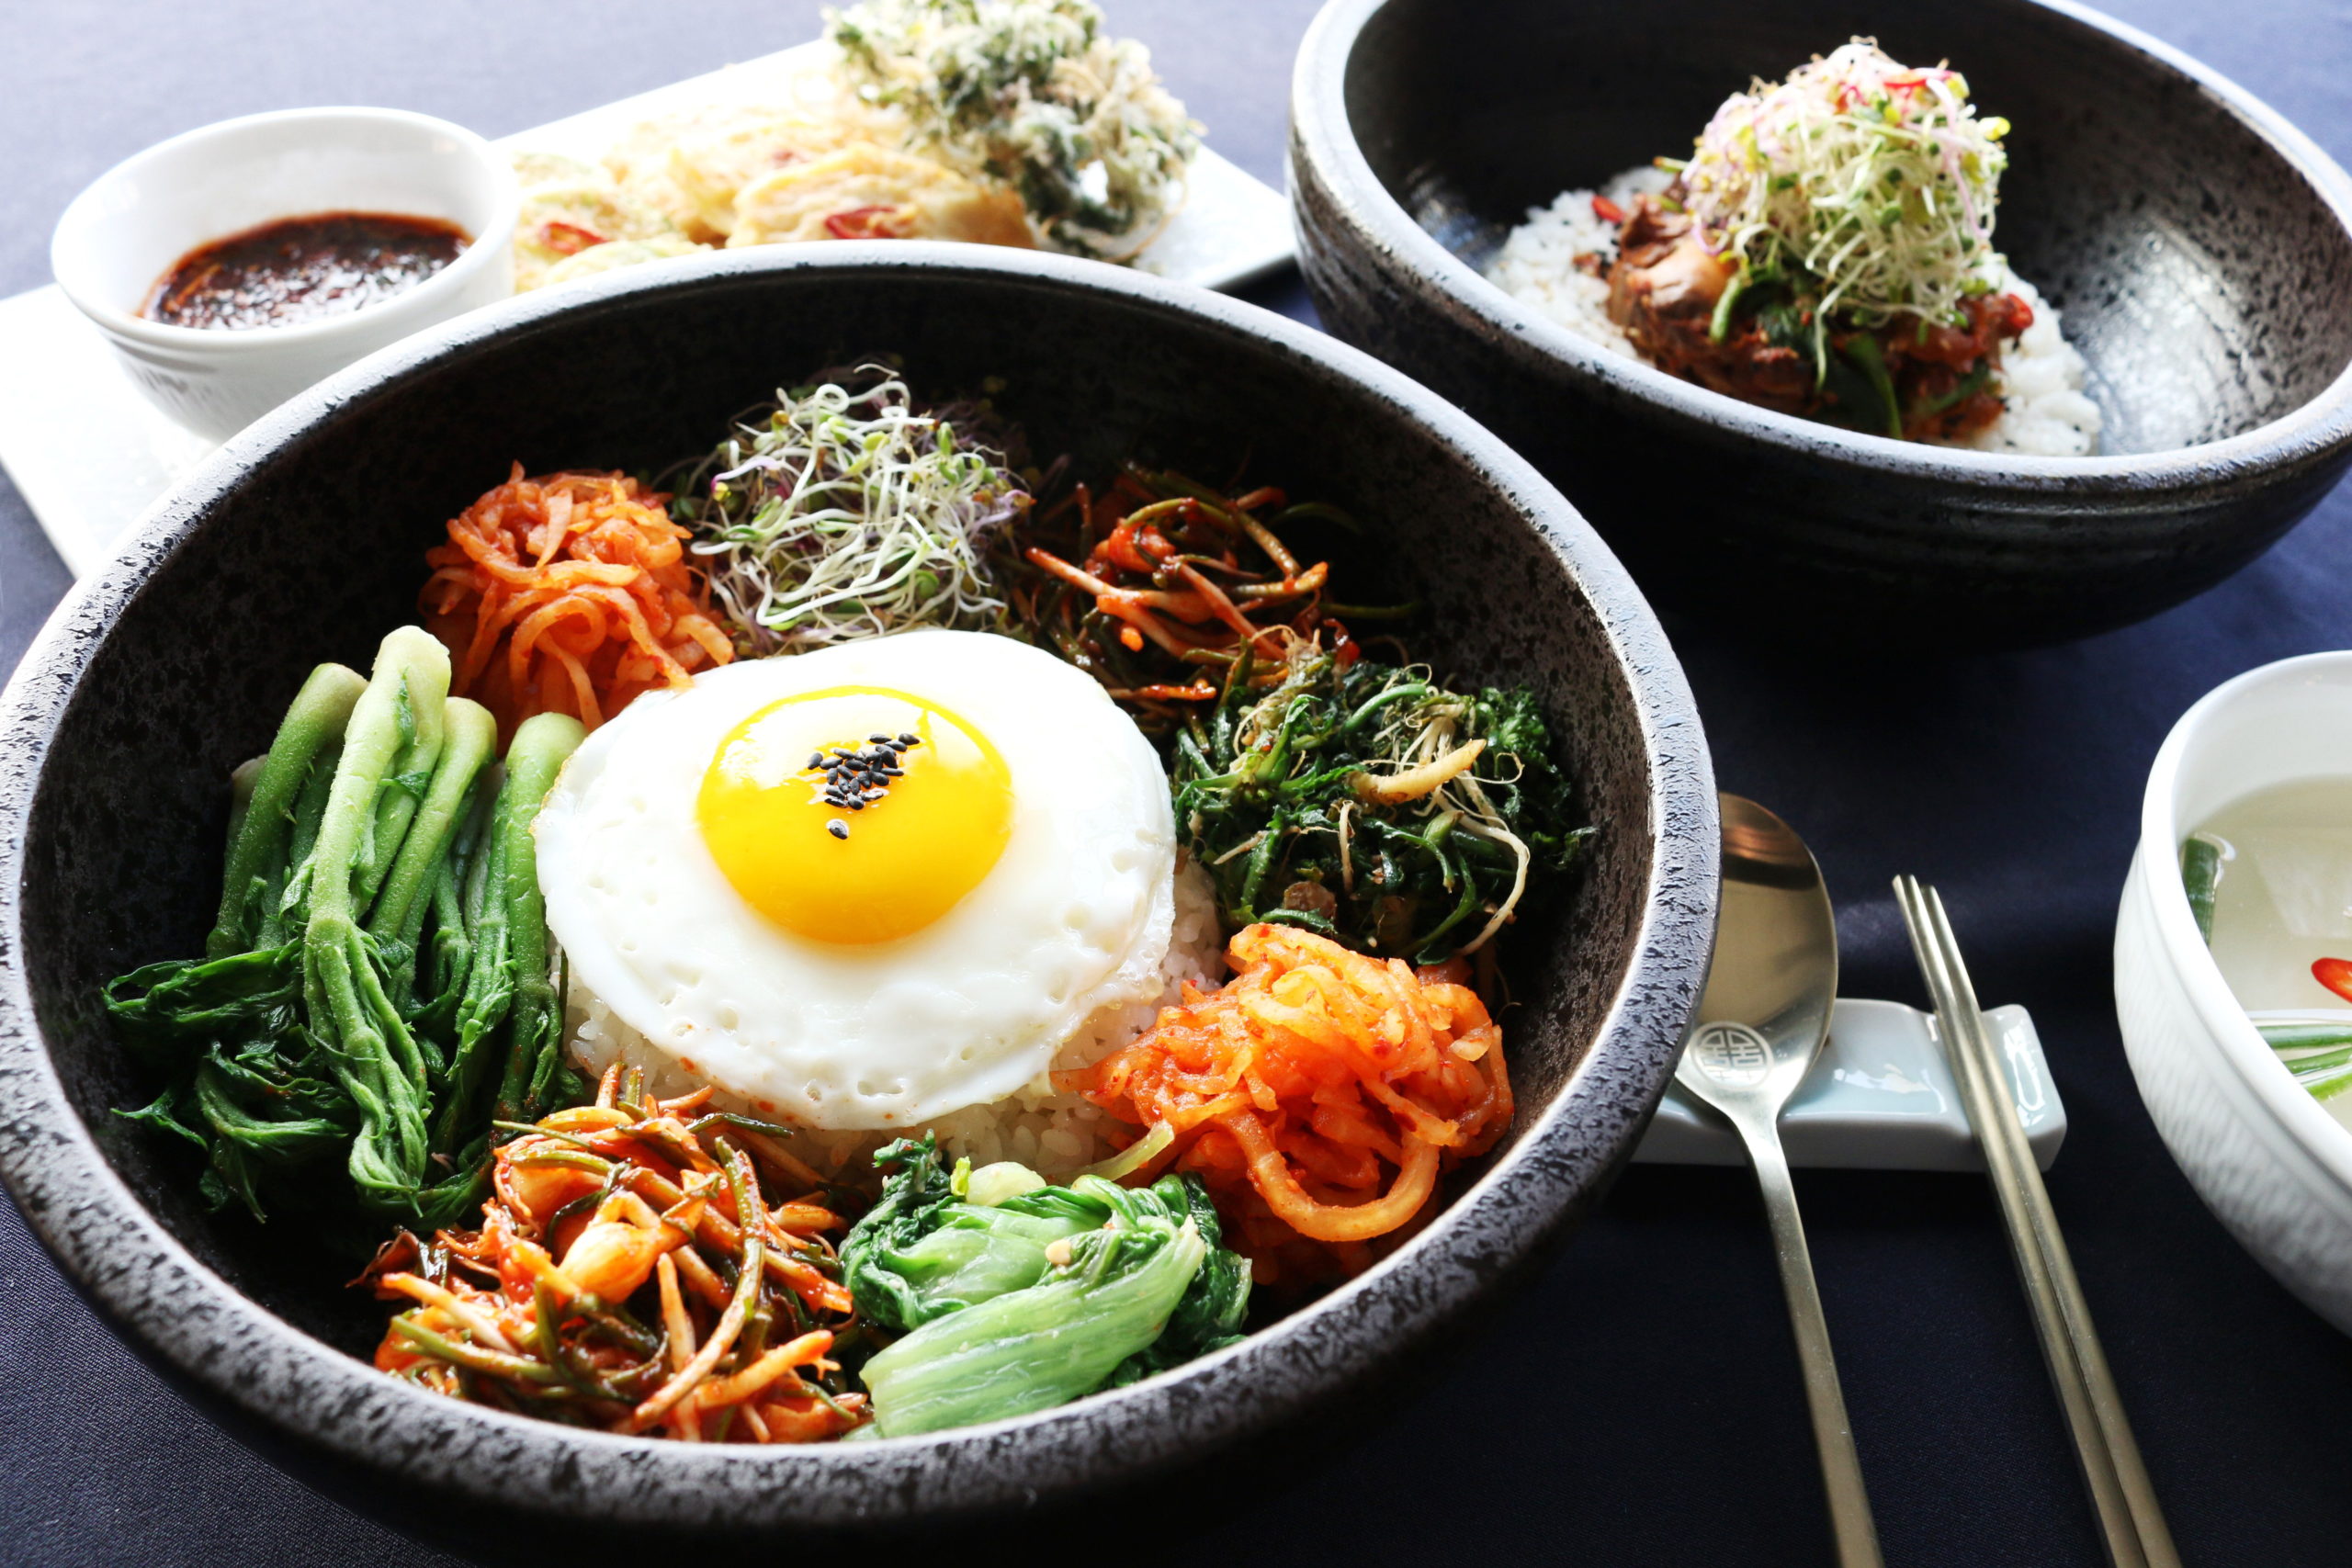 The best Korean food picked by foreign tourists